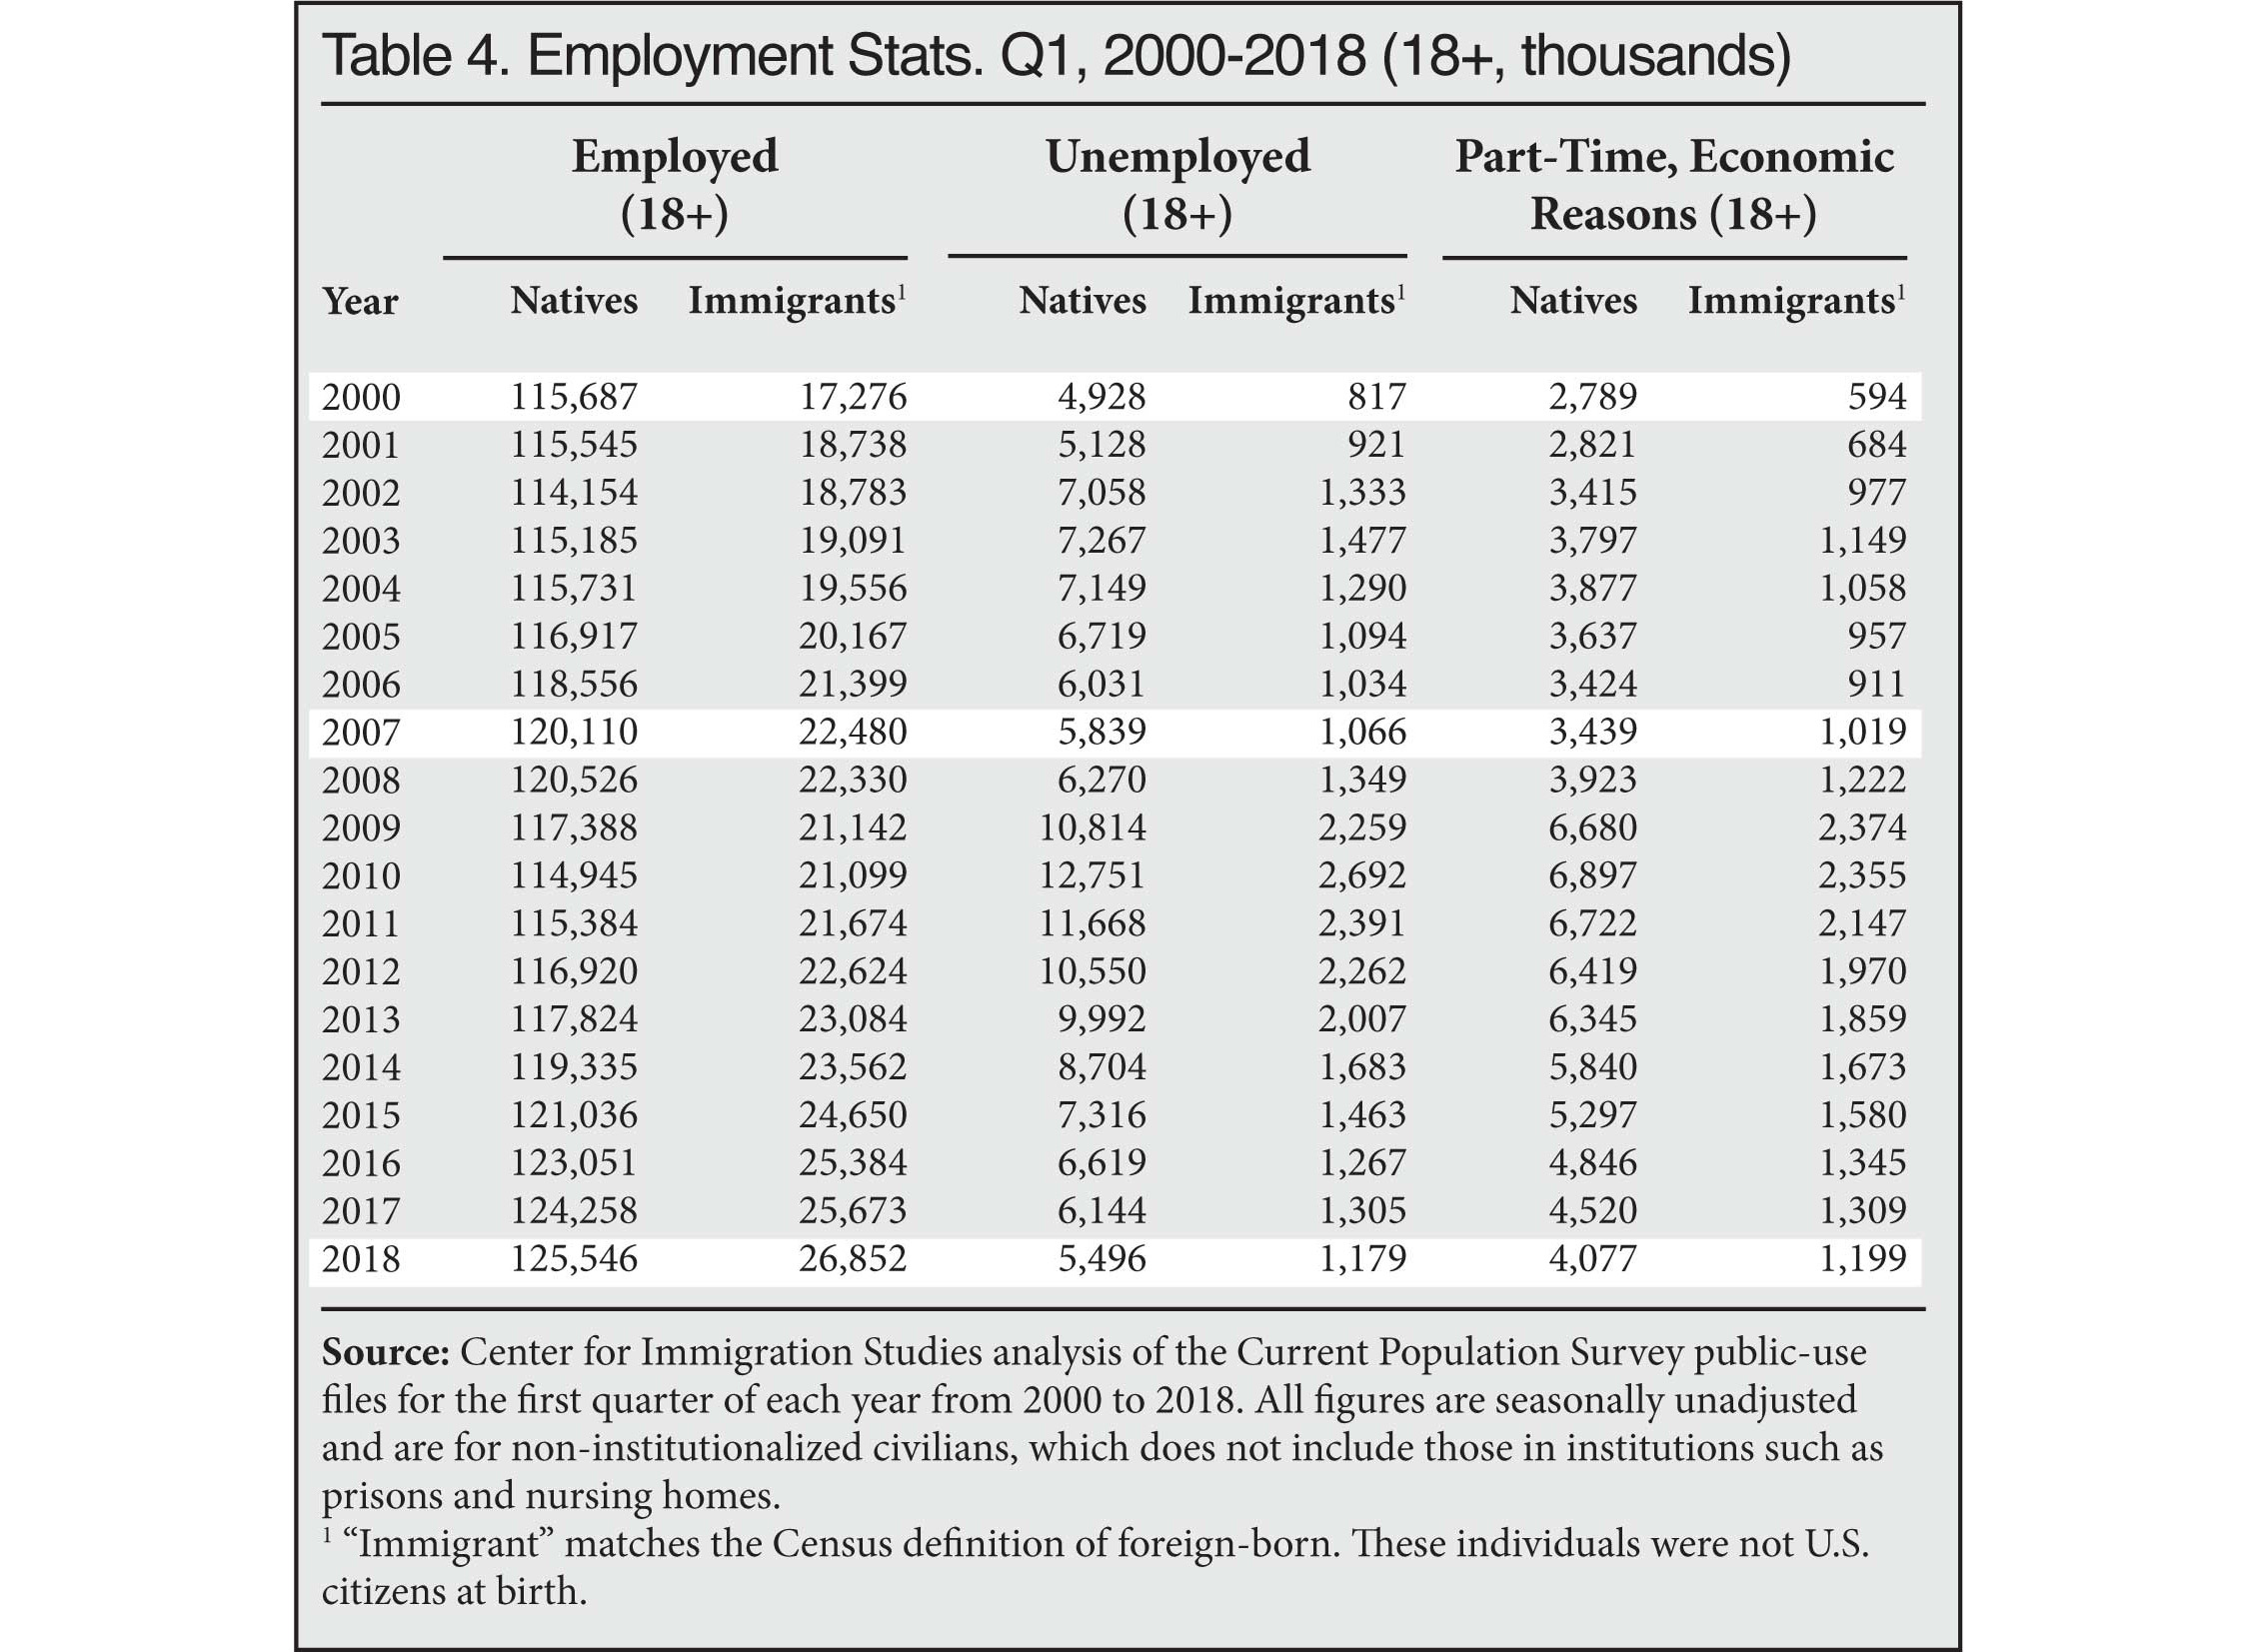 Table: Employment Stats, Q1, 2000 to 2018